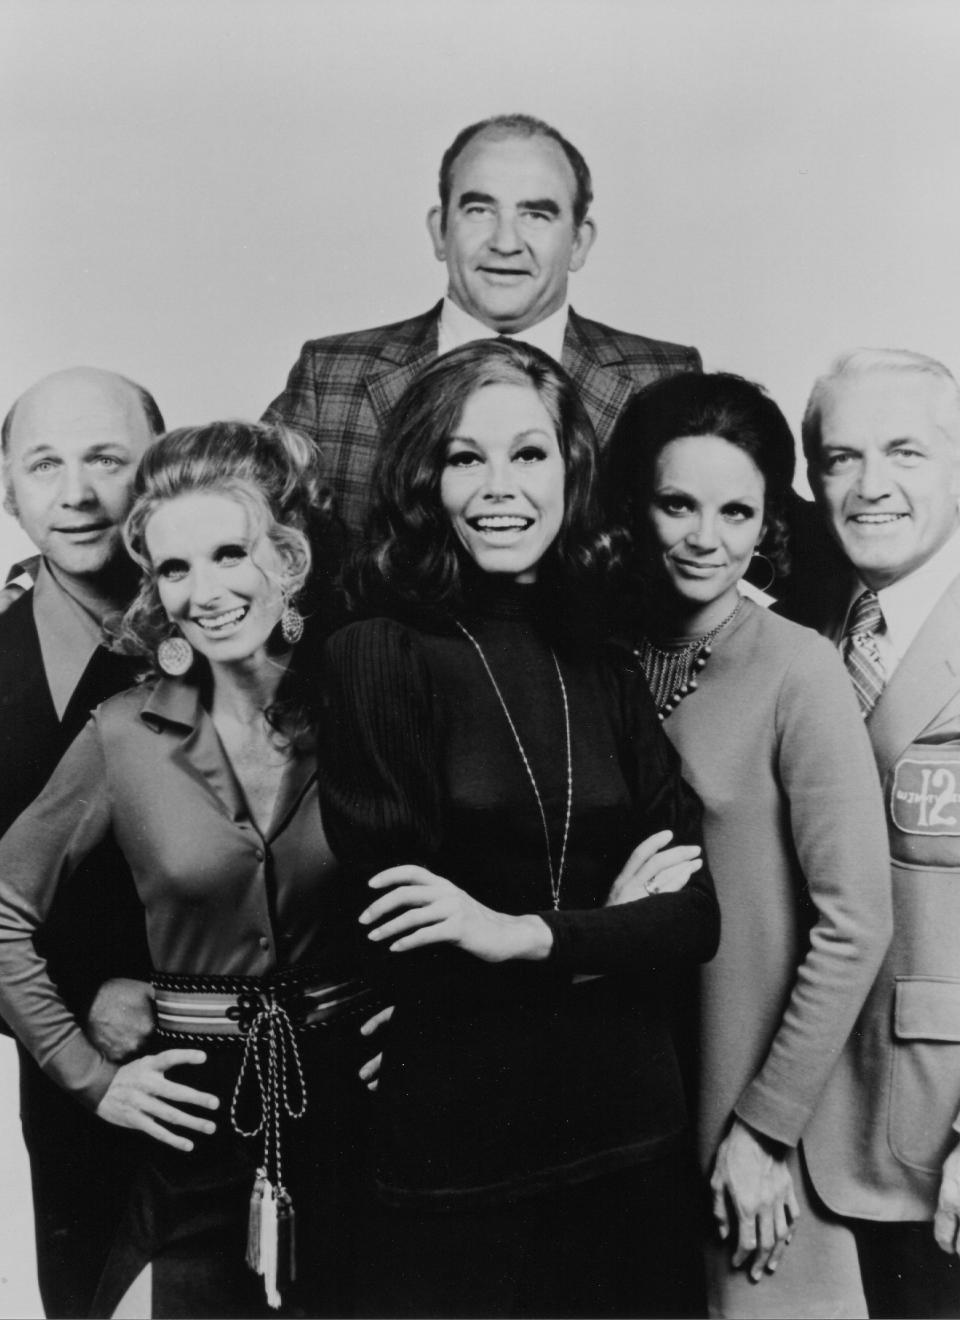 The last three major members of "Mary Tyler Moore," Gavin MacLeod, Cloris Leachman and Ed Asner, died in 2021. Also included in this promo photo are Mary Tyler Moore, Valerie Harper and Ted Knight.